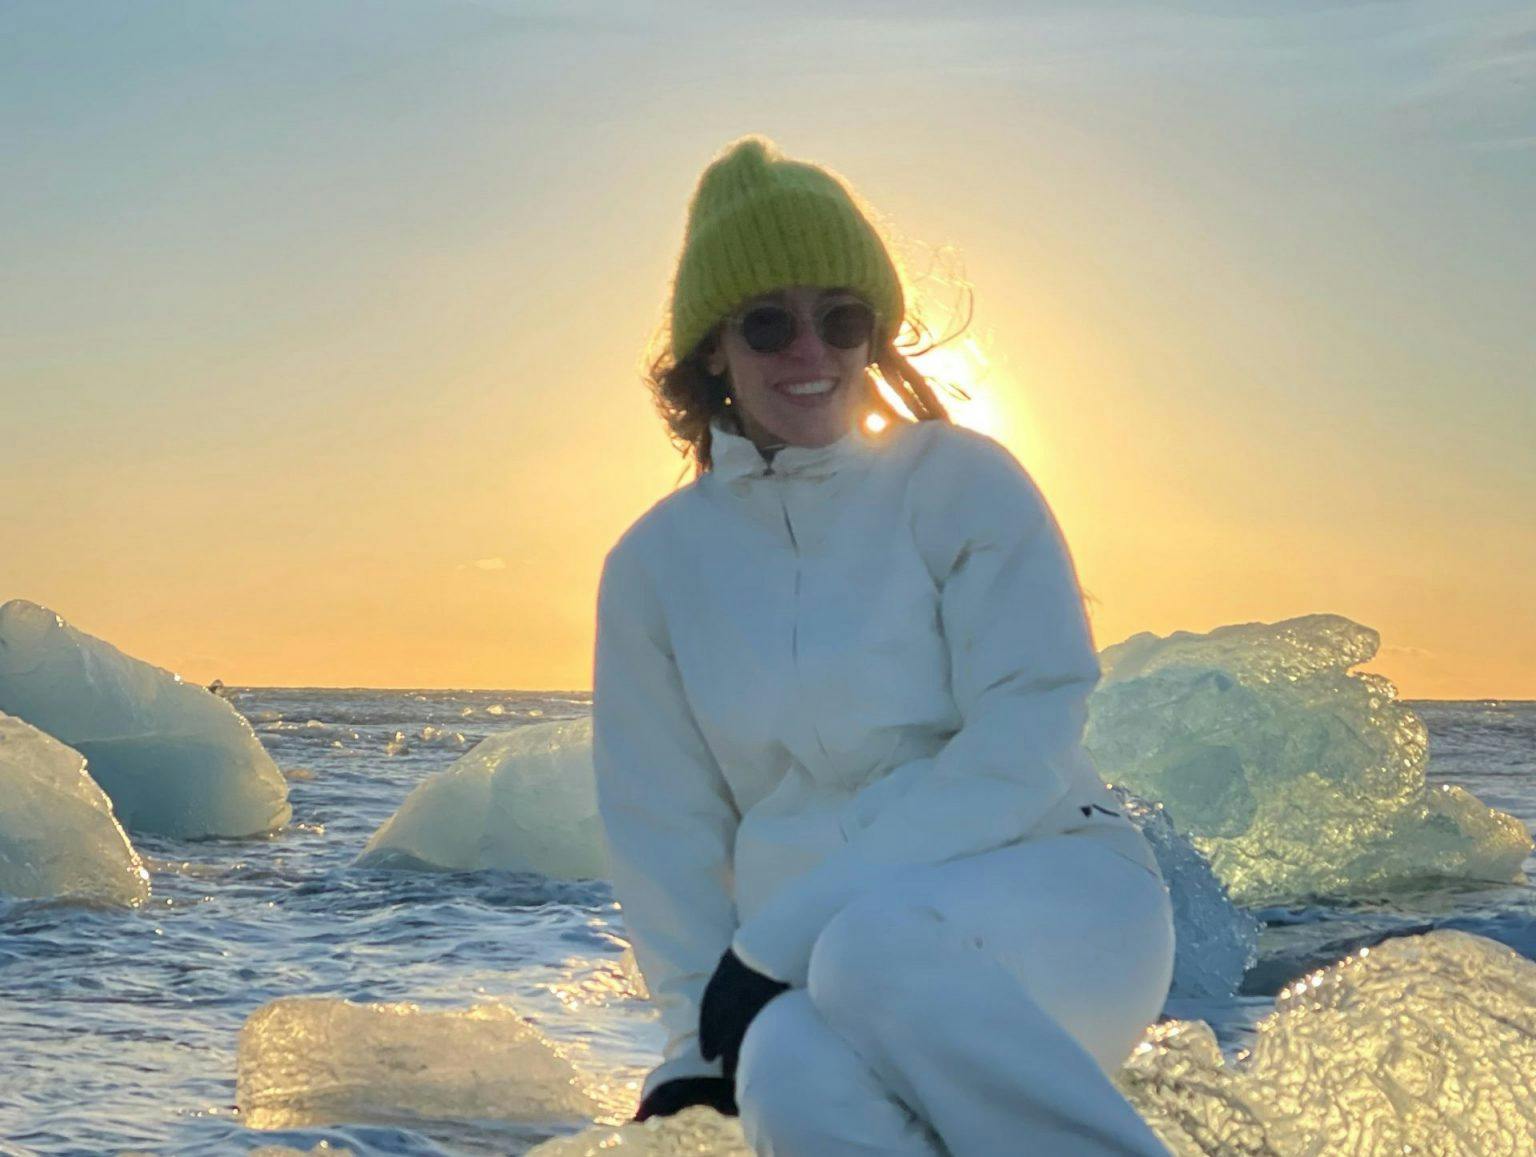 Photo of Giorgia Alimenti sitting on ice in front of a setting sun.